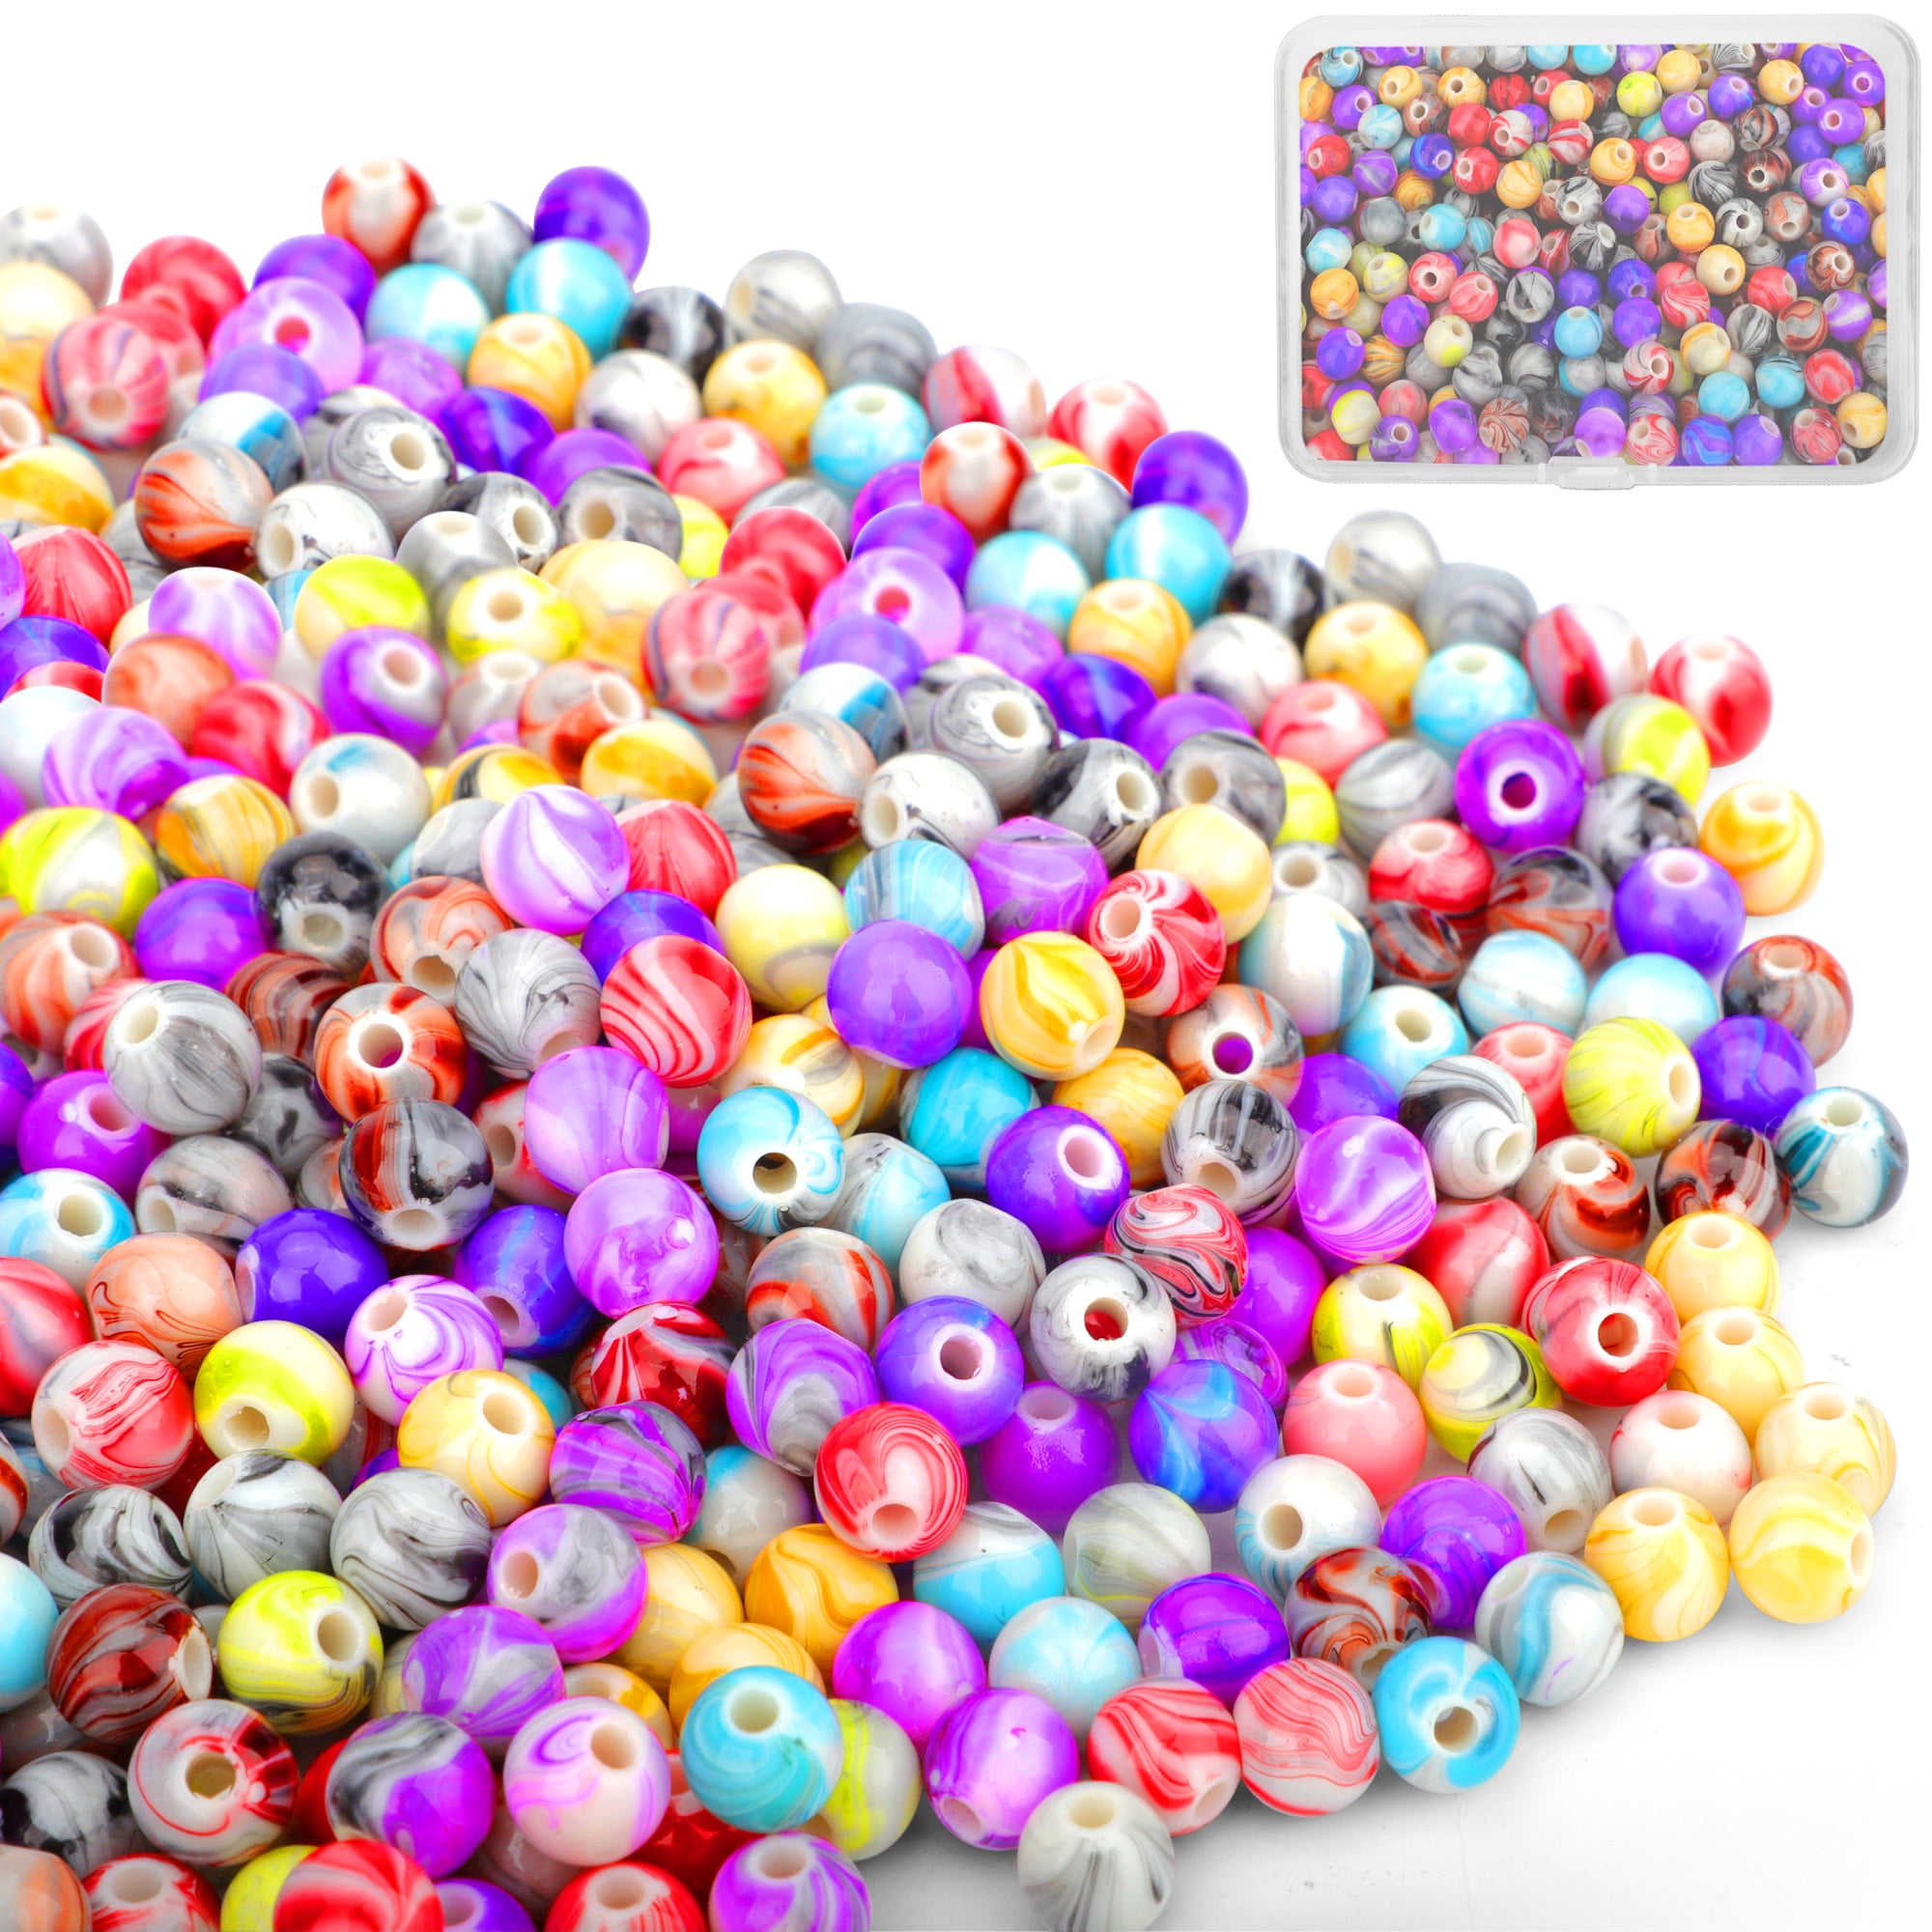 100pcs/lot Colored Acrylic Round Beads Big Round Loose Beads DIY Bracelets  Charms Necklace Beads For Jewelry Making